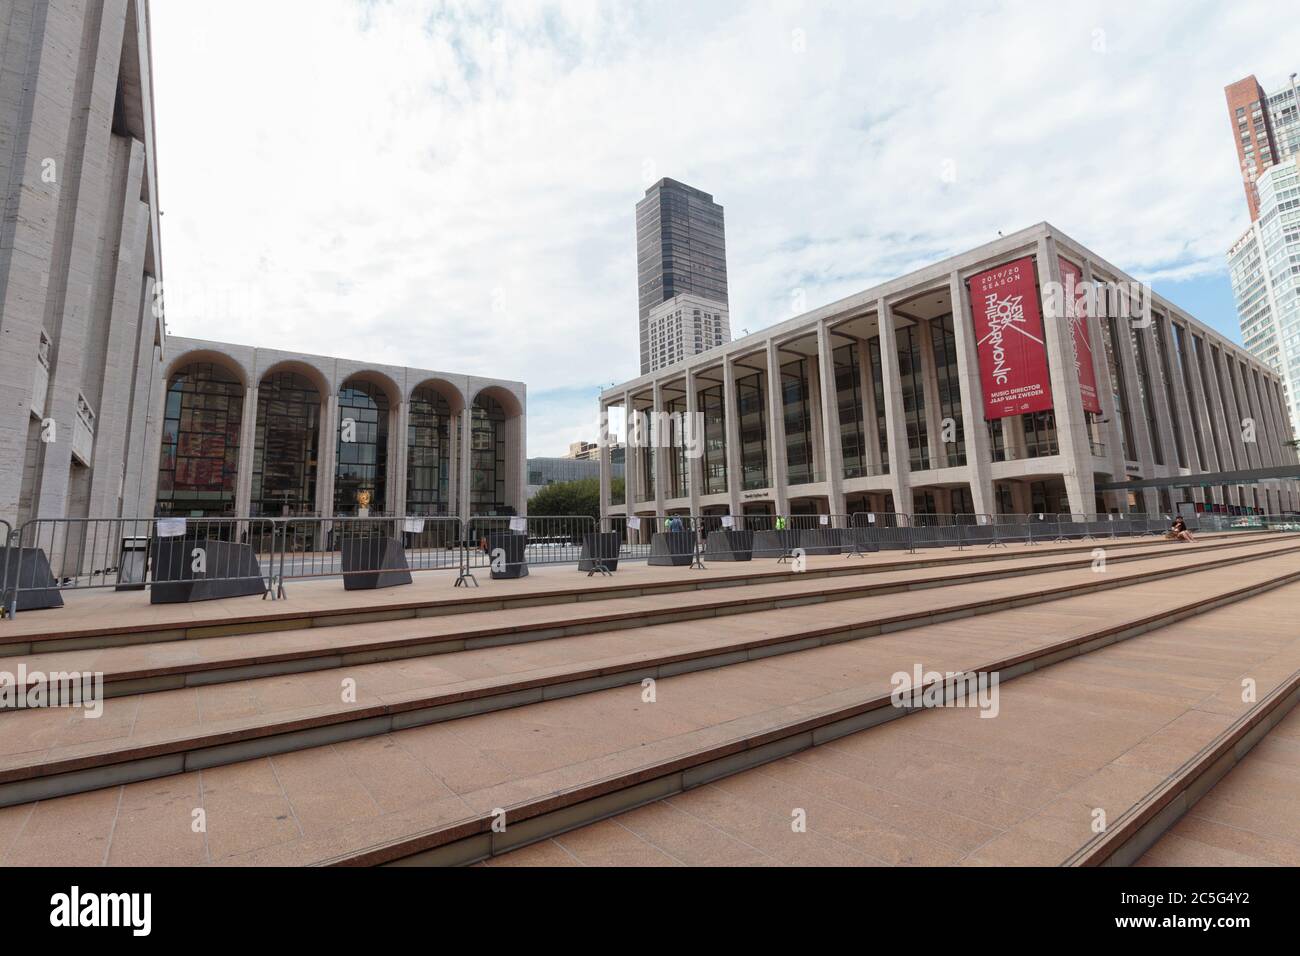 the Lincoln Center Plaza, home to the Met Opera and NY Philharmonic, with barriers indicating it is closed due to the coronavirus or covid-19 pandemic Stock Photo